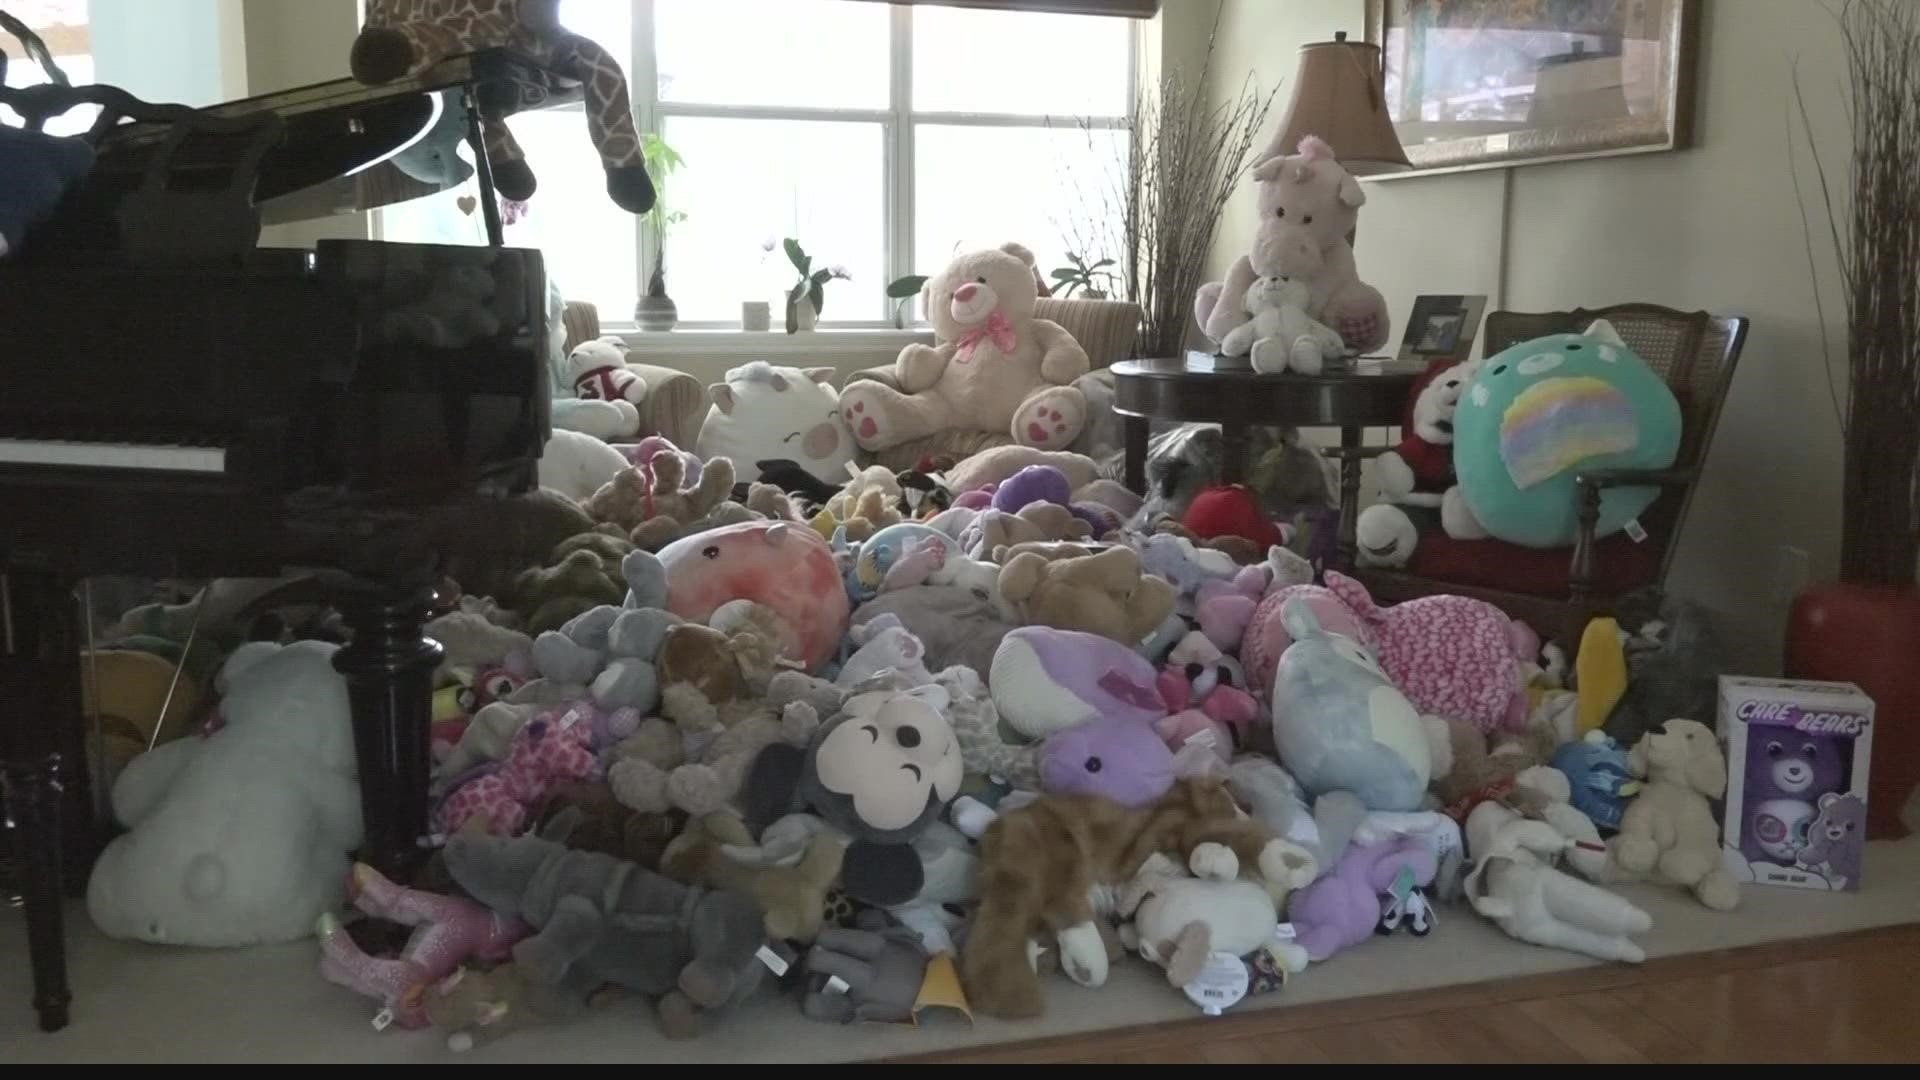 Sage Goodall has collected more than 1,000 stuffed animals for Ukrainian children. He said he wants kids to have something to hug when they're scared.